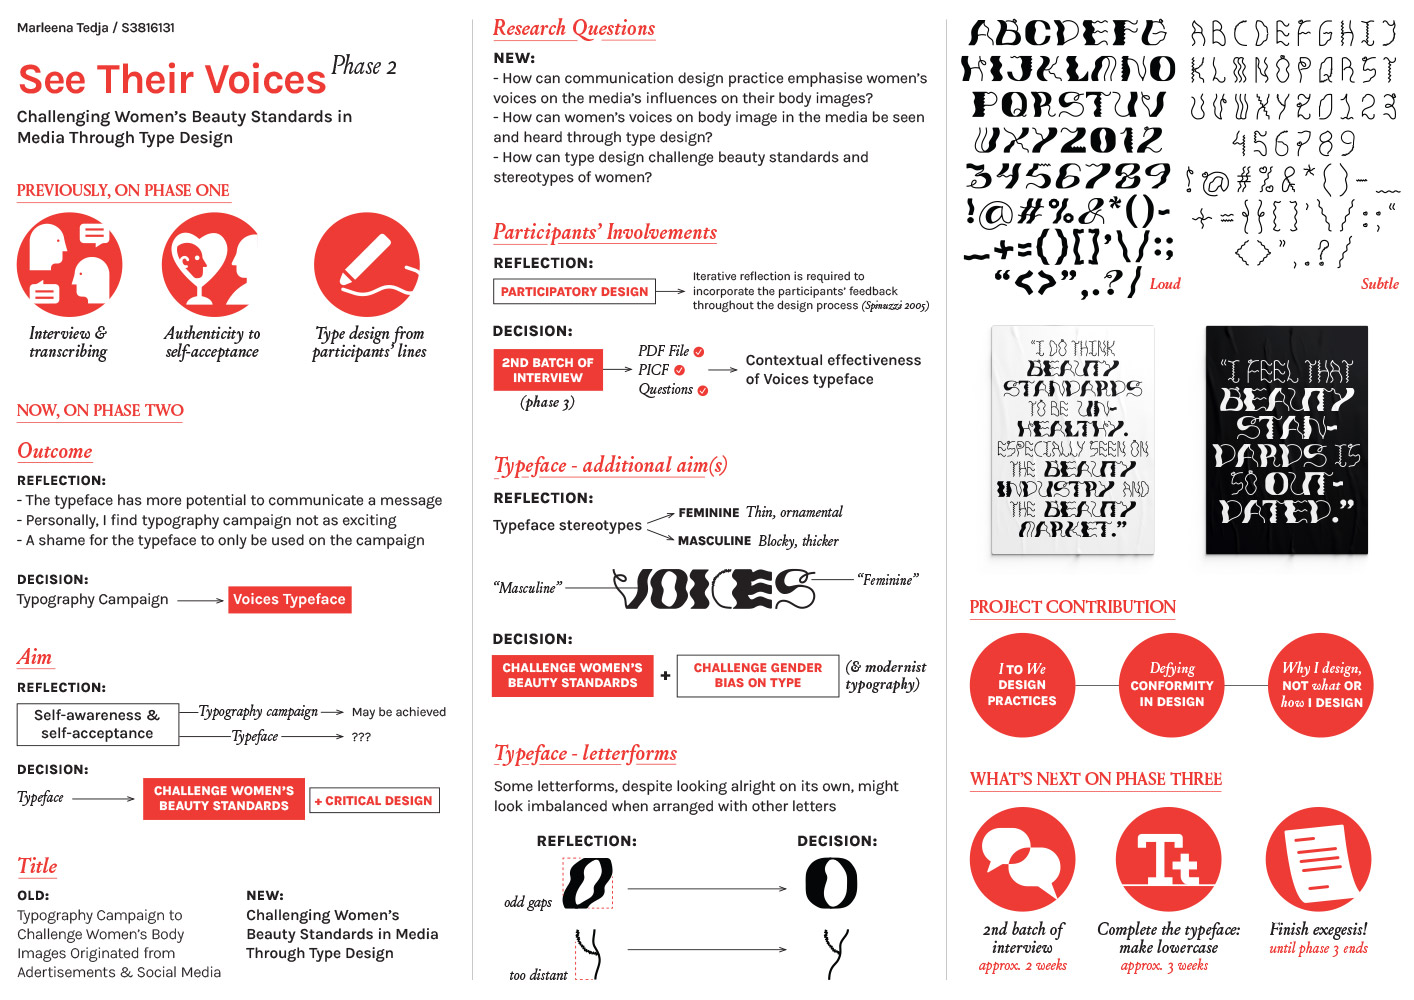 The aim of phase 2 was to understand the potentials of a collective type design. This phase revealed how a collective typeface, named Voices, has the ability to not only challenge women’s beauty standards in the media, but also confront the general graphic design norms that are enforced upon us as well as breaking the individual authority by incorporating elements (lines) by participants. Voices typeface also challenges the gender bias found on type, discovered by its thick and thin shapes, blocky yet ornamental.